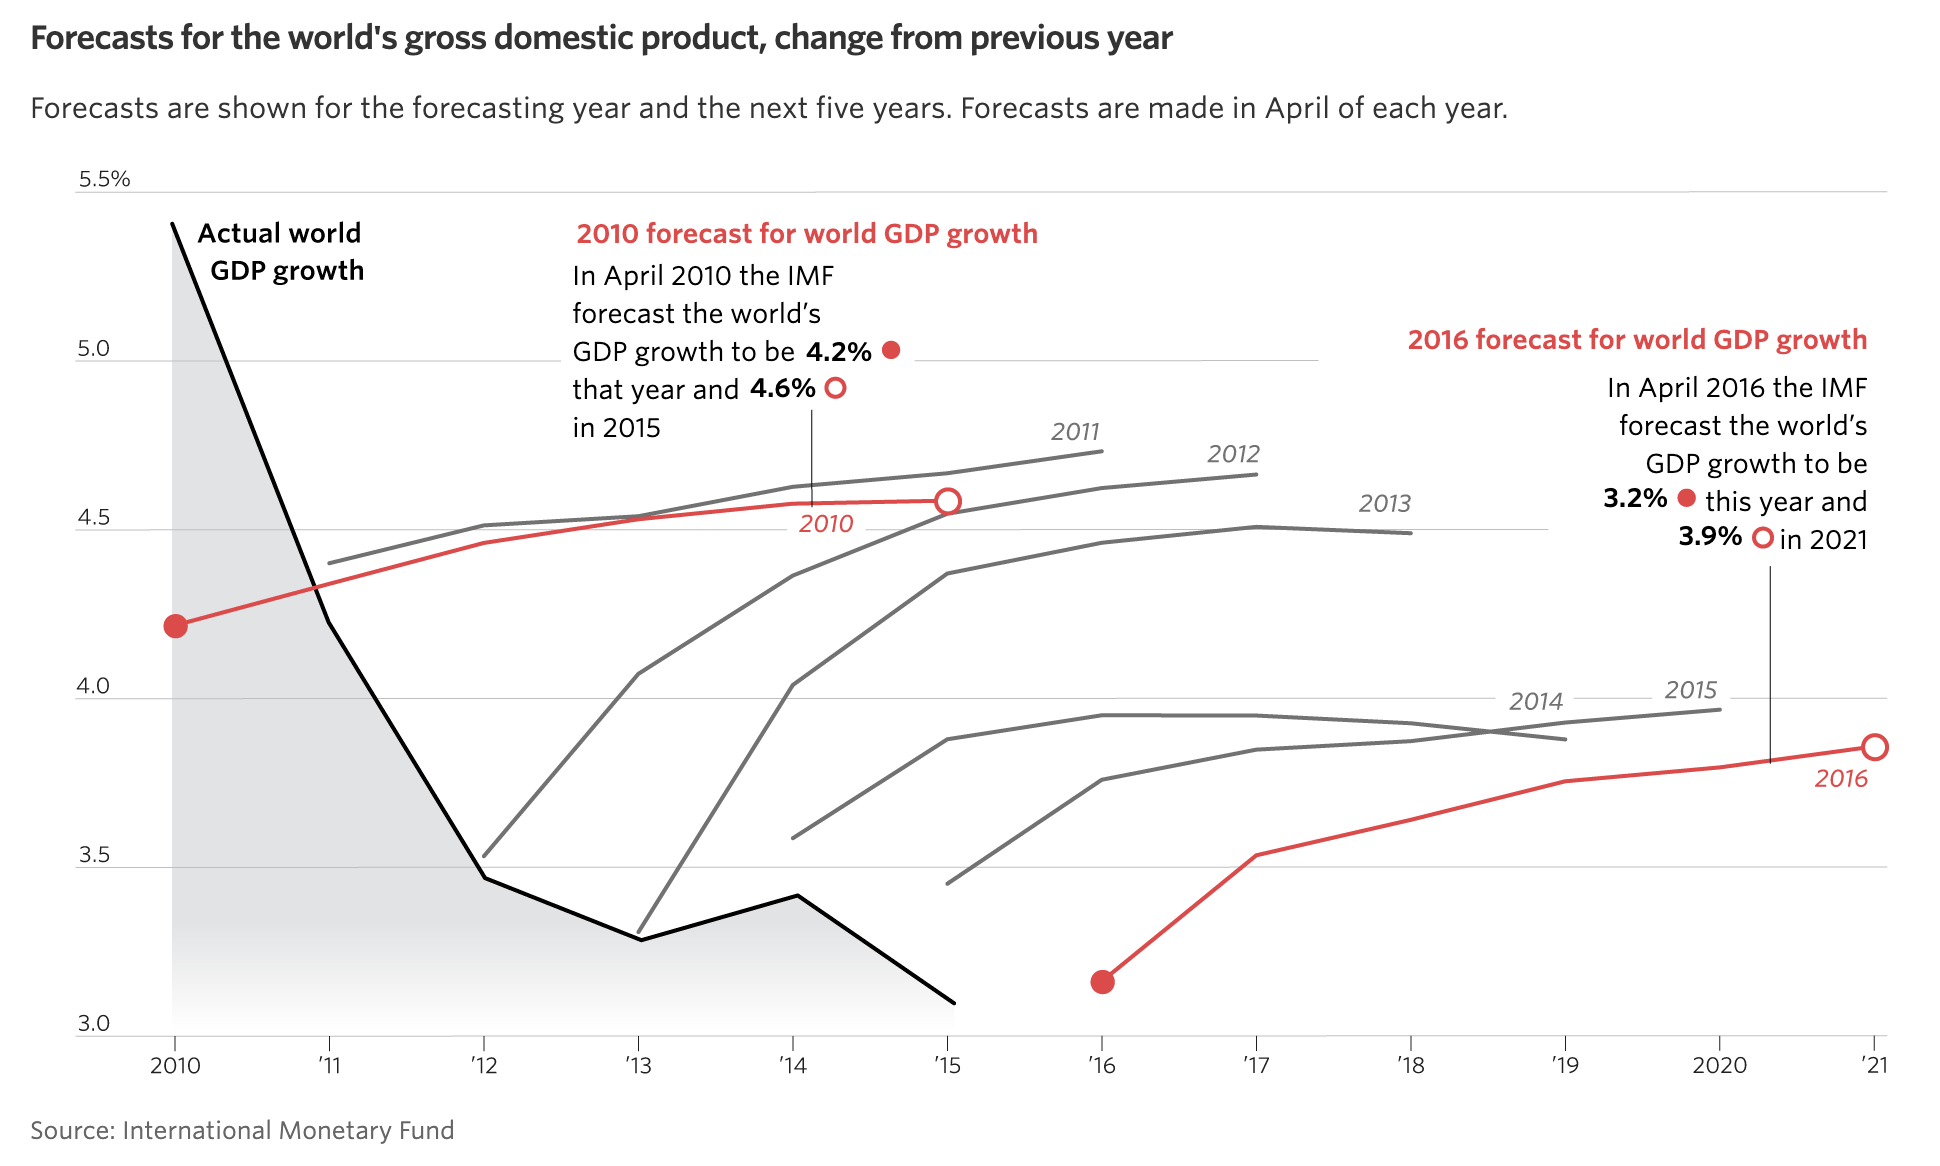 A lien chart showing forecasts for world GDP, with a title Forecasts for the world's gross domestic product, change from previous years. The chart has two annotations for the forecasts in 2010 and 2016